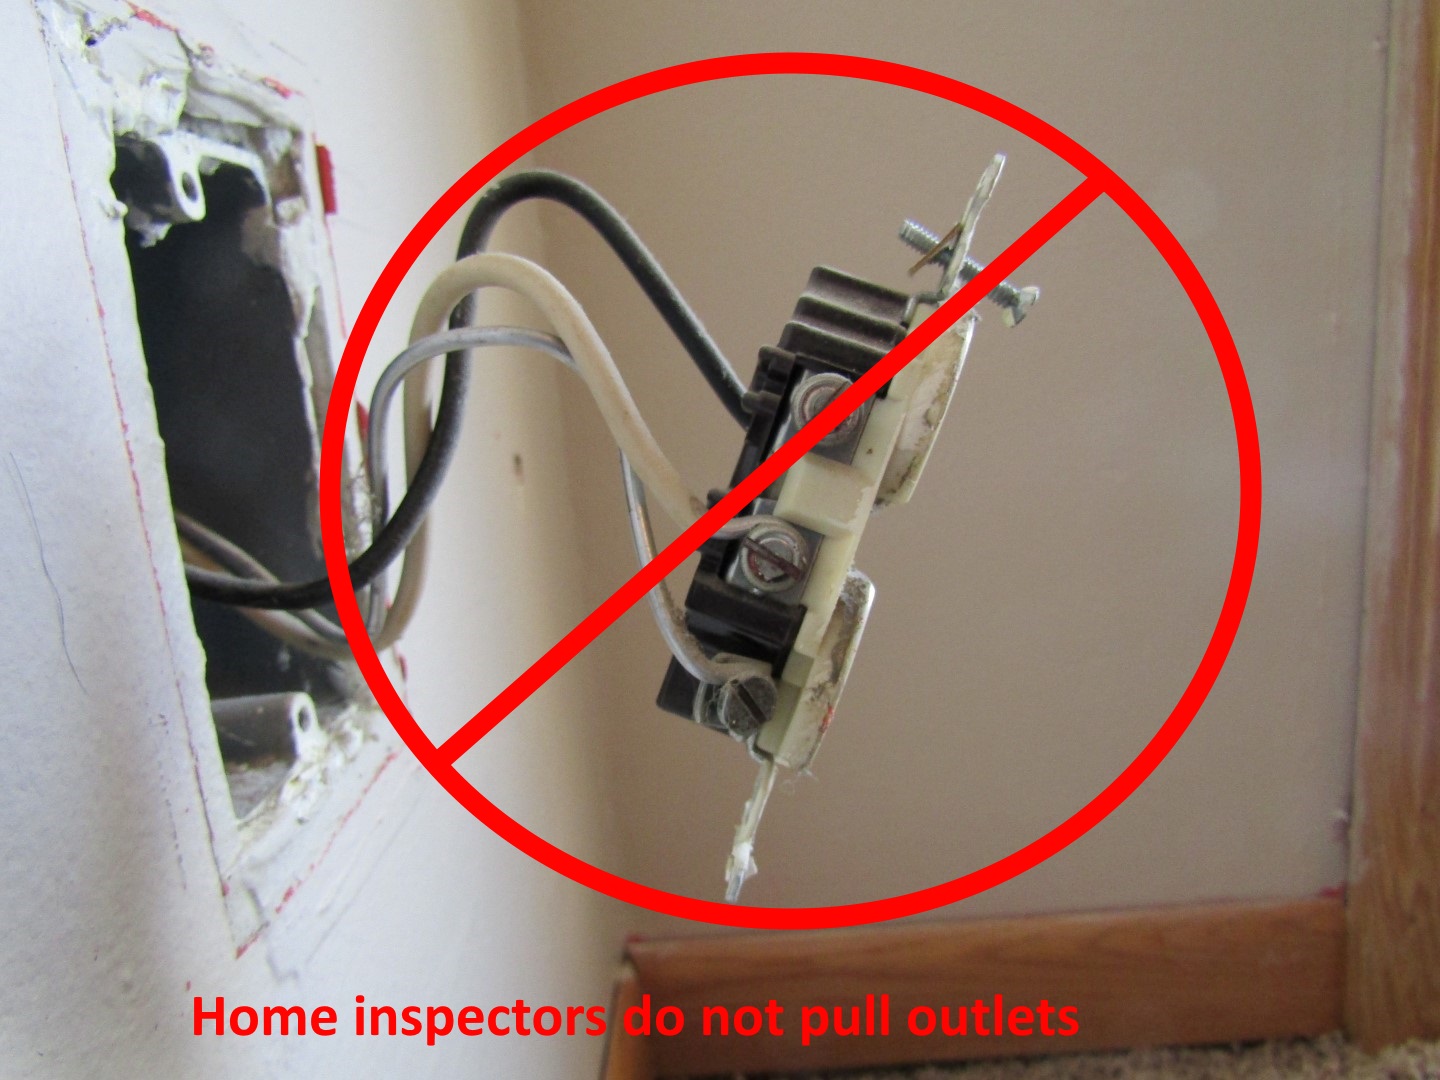 Hazards With Aluminum Wiring, How To Replace Aluminum Wiring In House